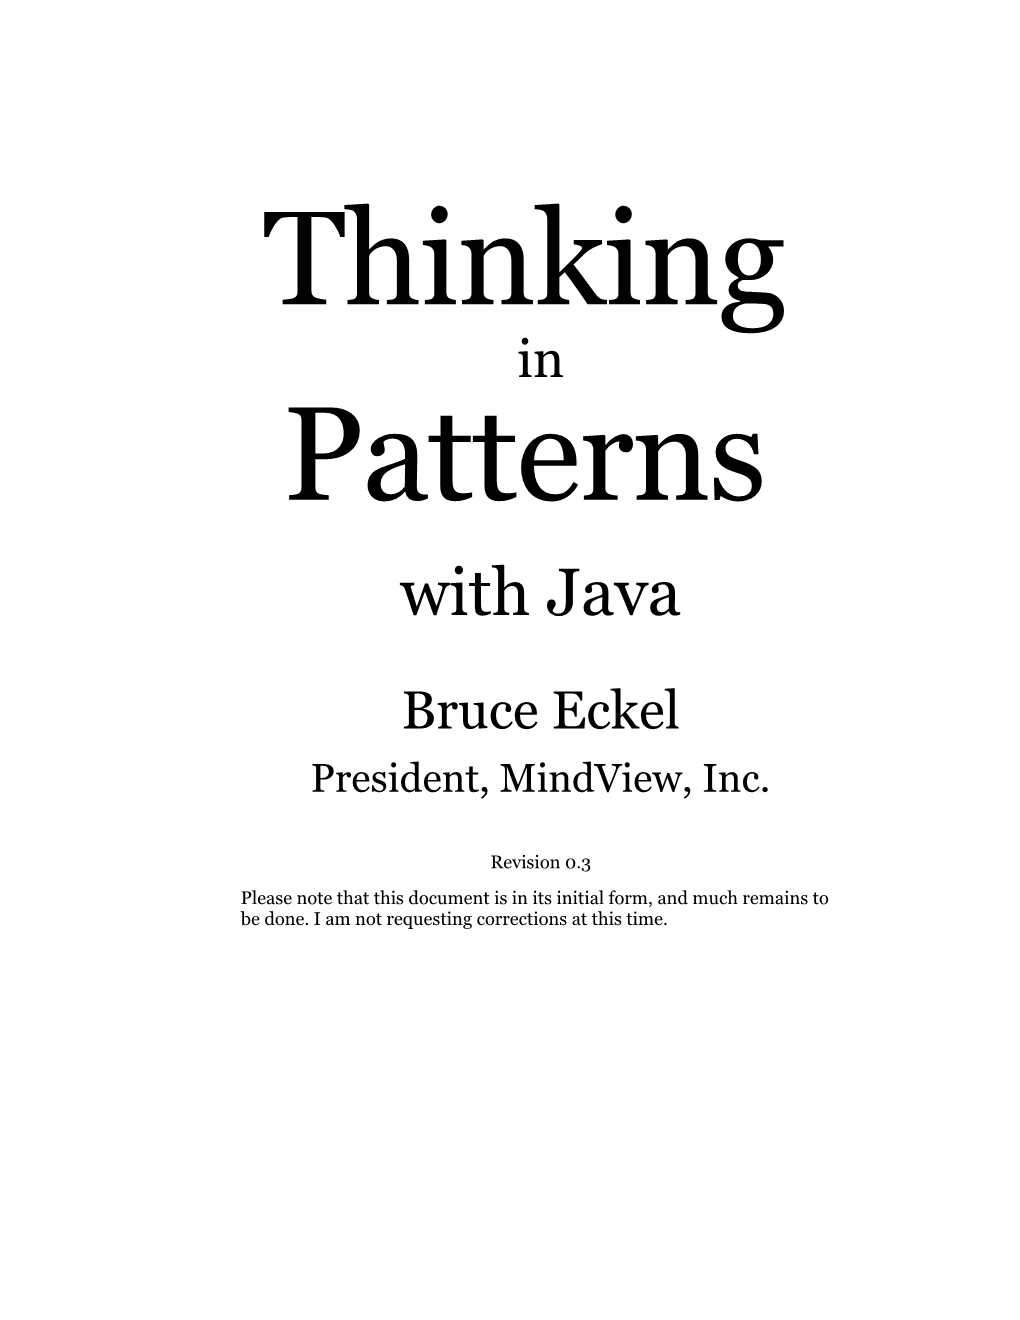 Thinking in Patterns with Java